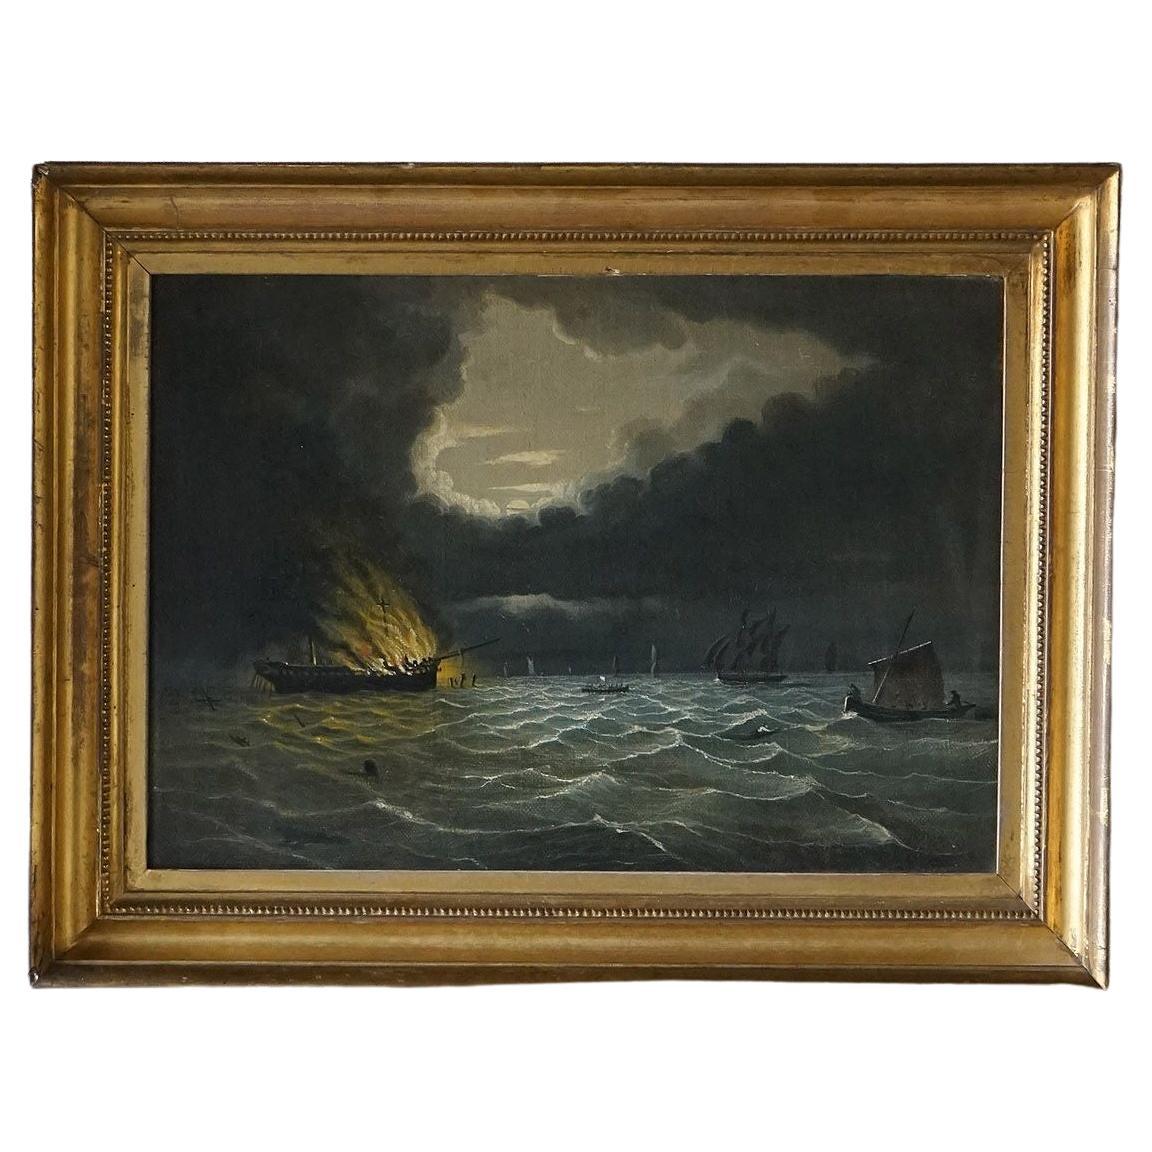 Seascape Depicting a Burning Ship, Antique Original Oil on Canvas Painting